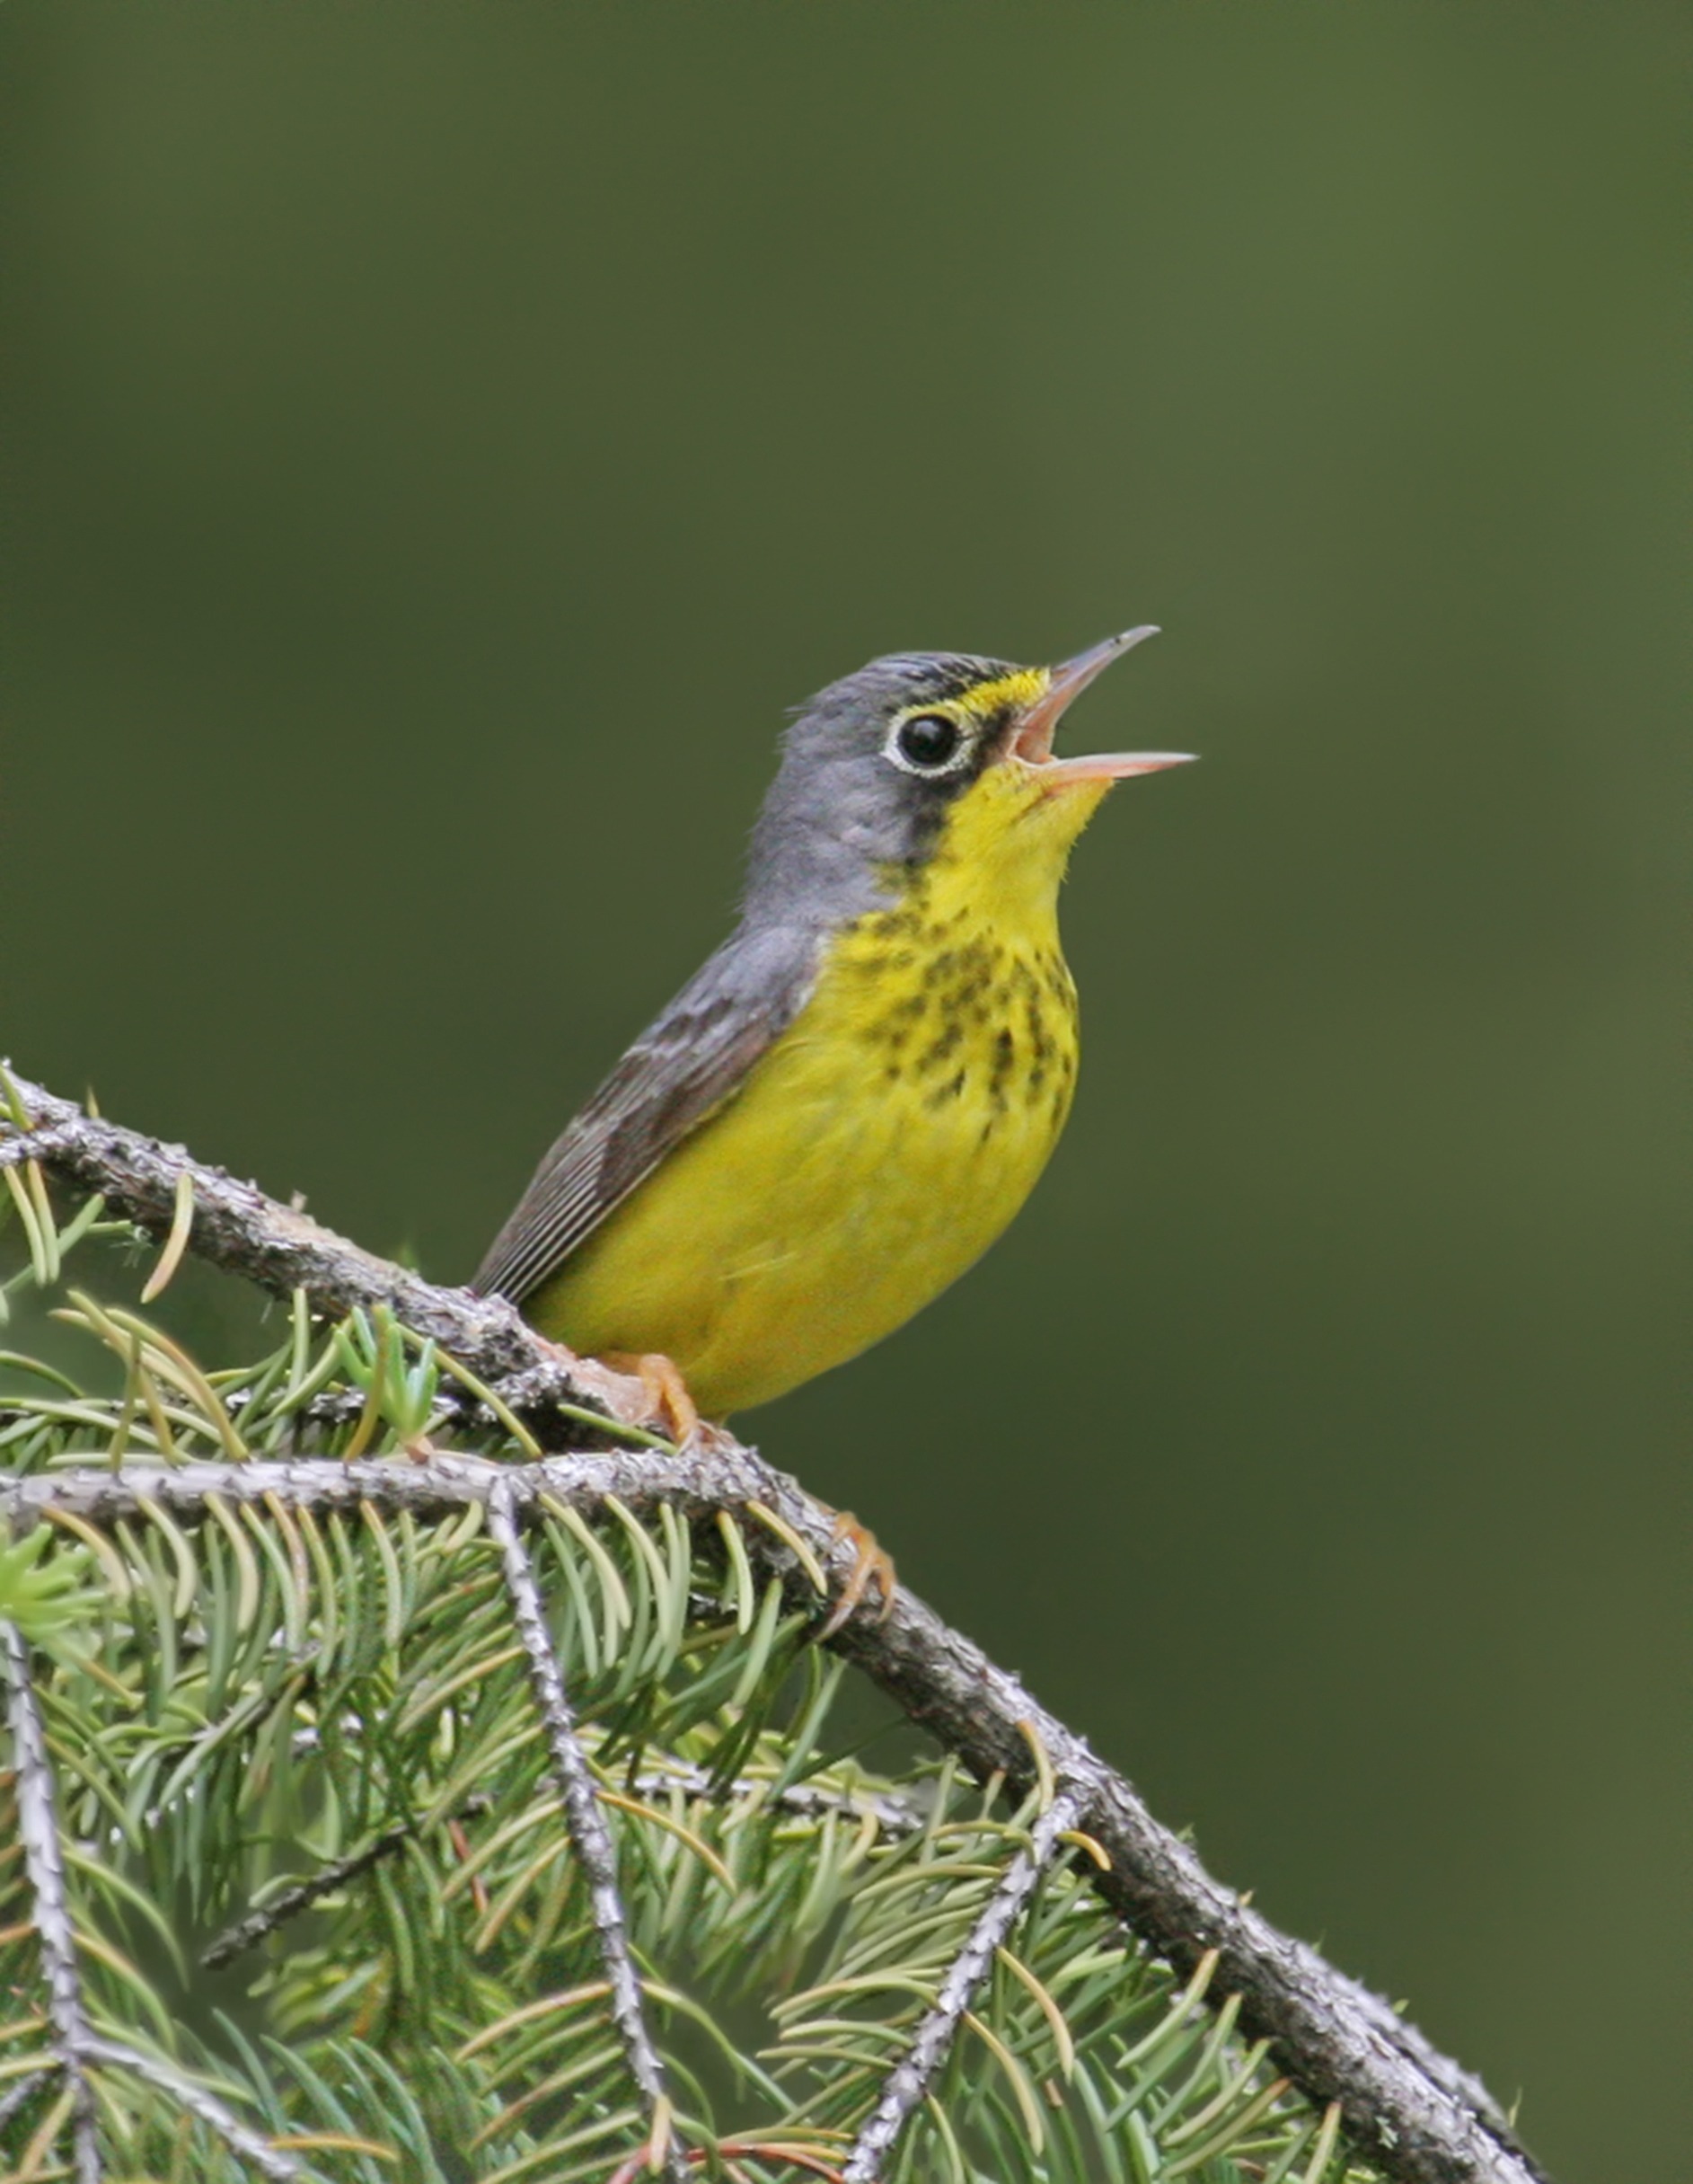 Canada Warbler singing from a branch.